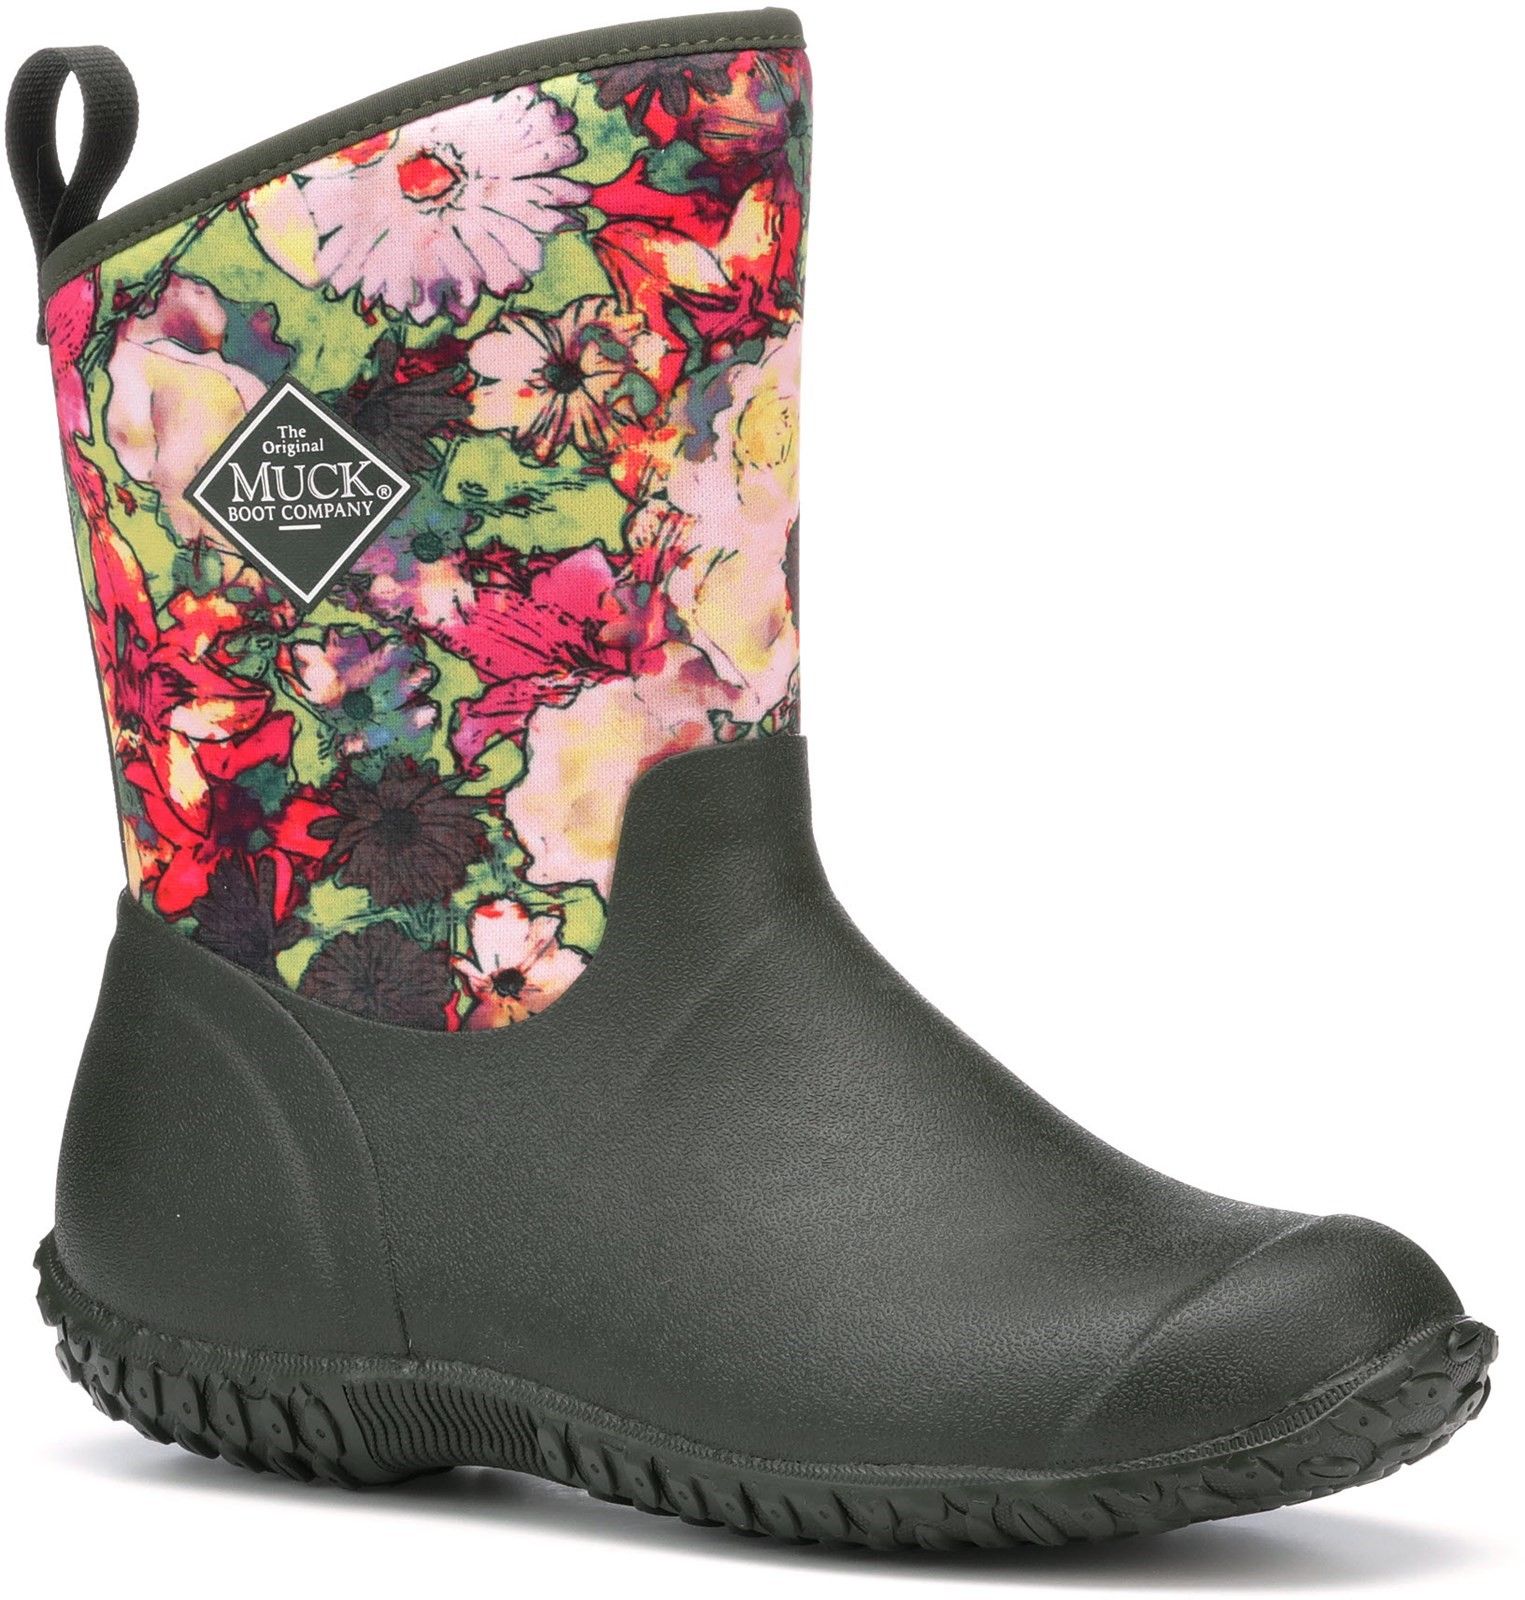 Ideal for the unpredictable British weather. 4mm neoprene can be rolled down and worn as an ankle boot. The high-traction rubber outsole holds in muddy conditions, along with breathable air mesh lining keeping your feet cool on warmer days.Womens Waterproof Mid Cut Utility Garden Boot. 
Neoprene Bootie Construction for Comfort and Warmth. 
Fold Down Versatility.